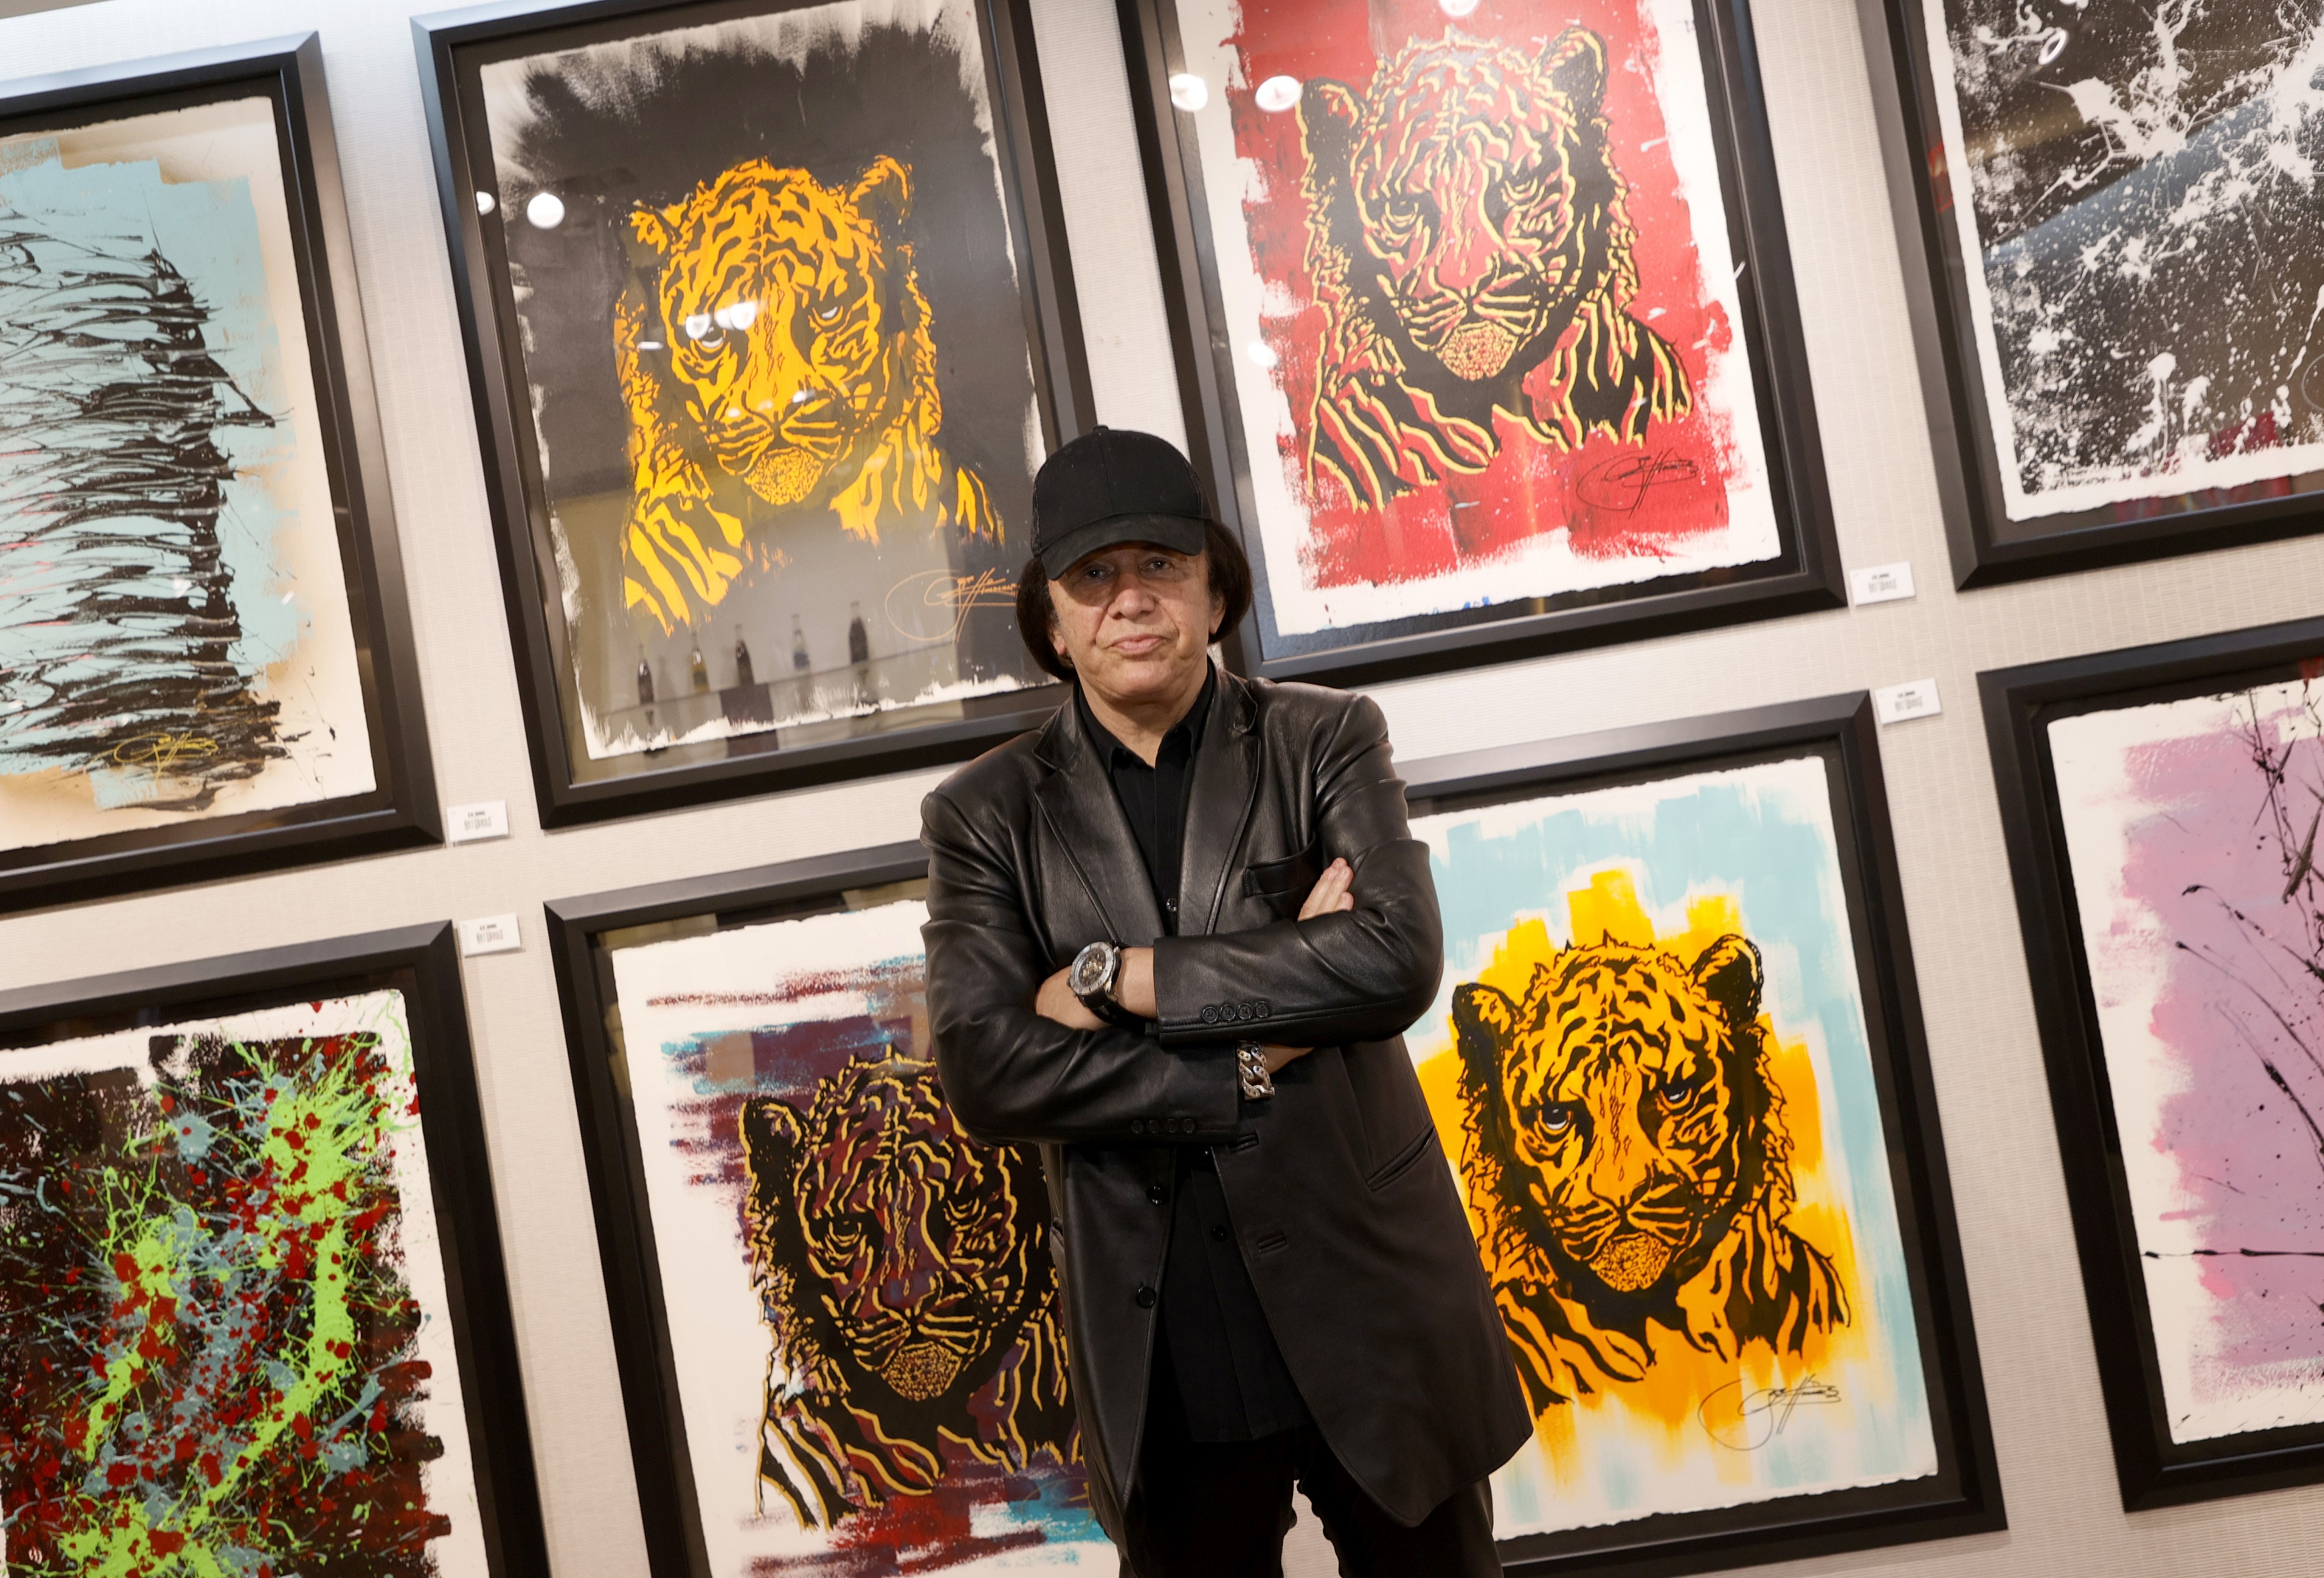 Gene Simmons with paintings of tigers